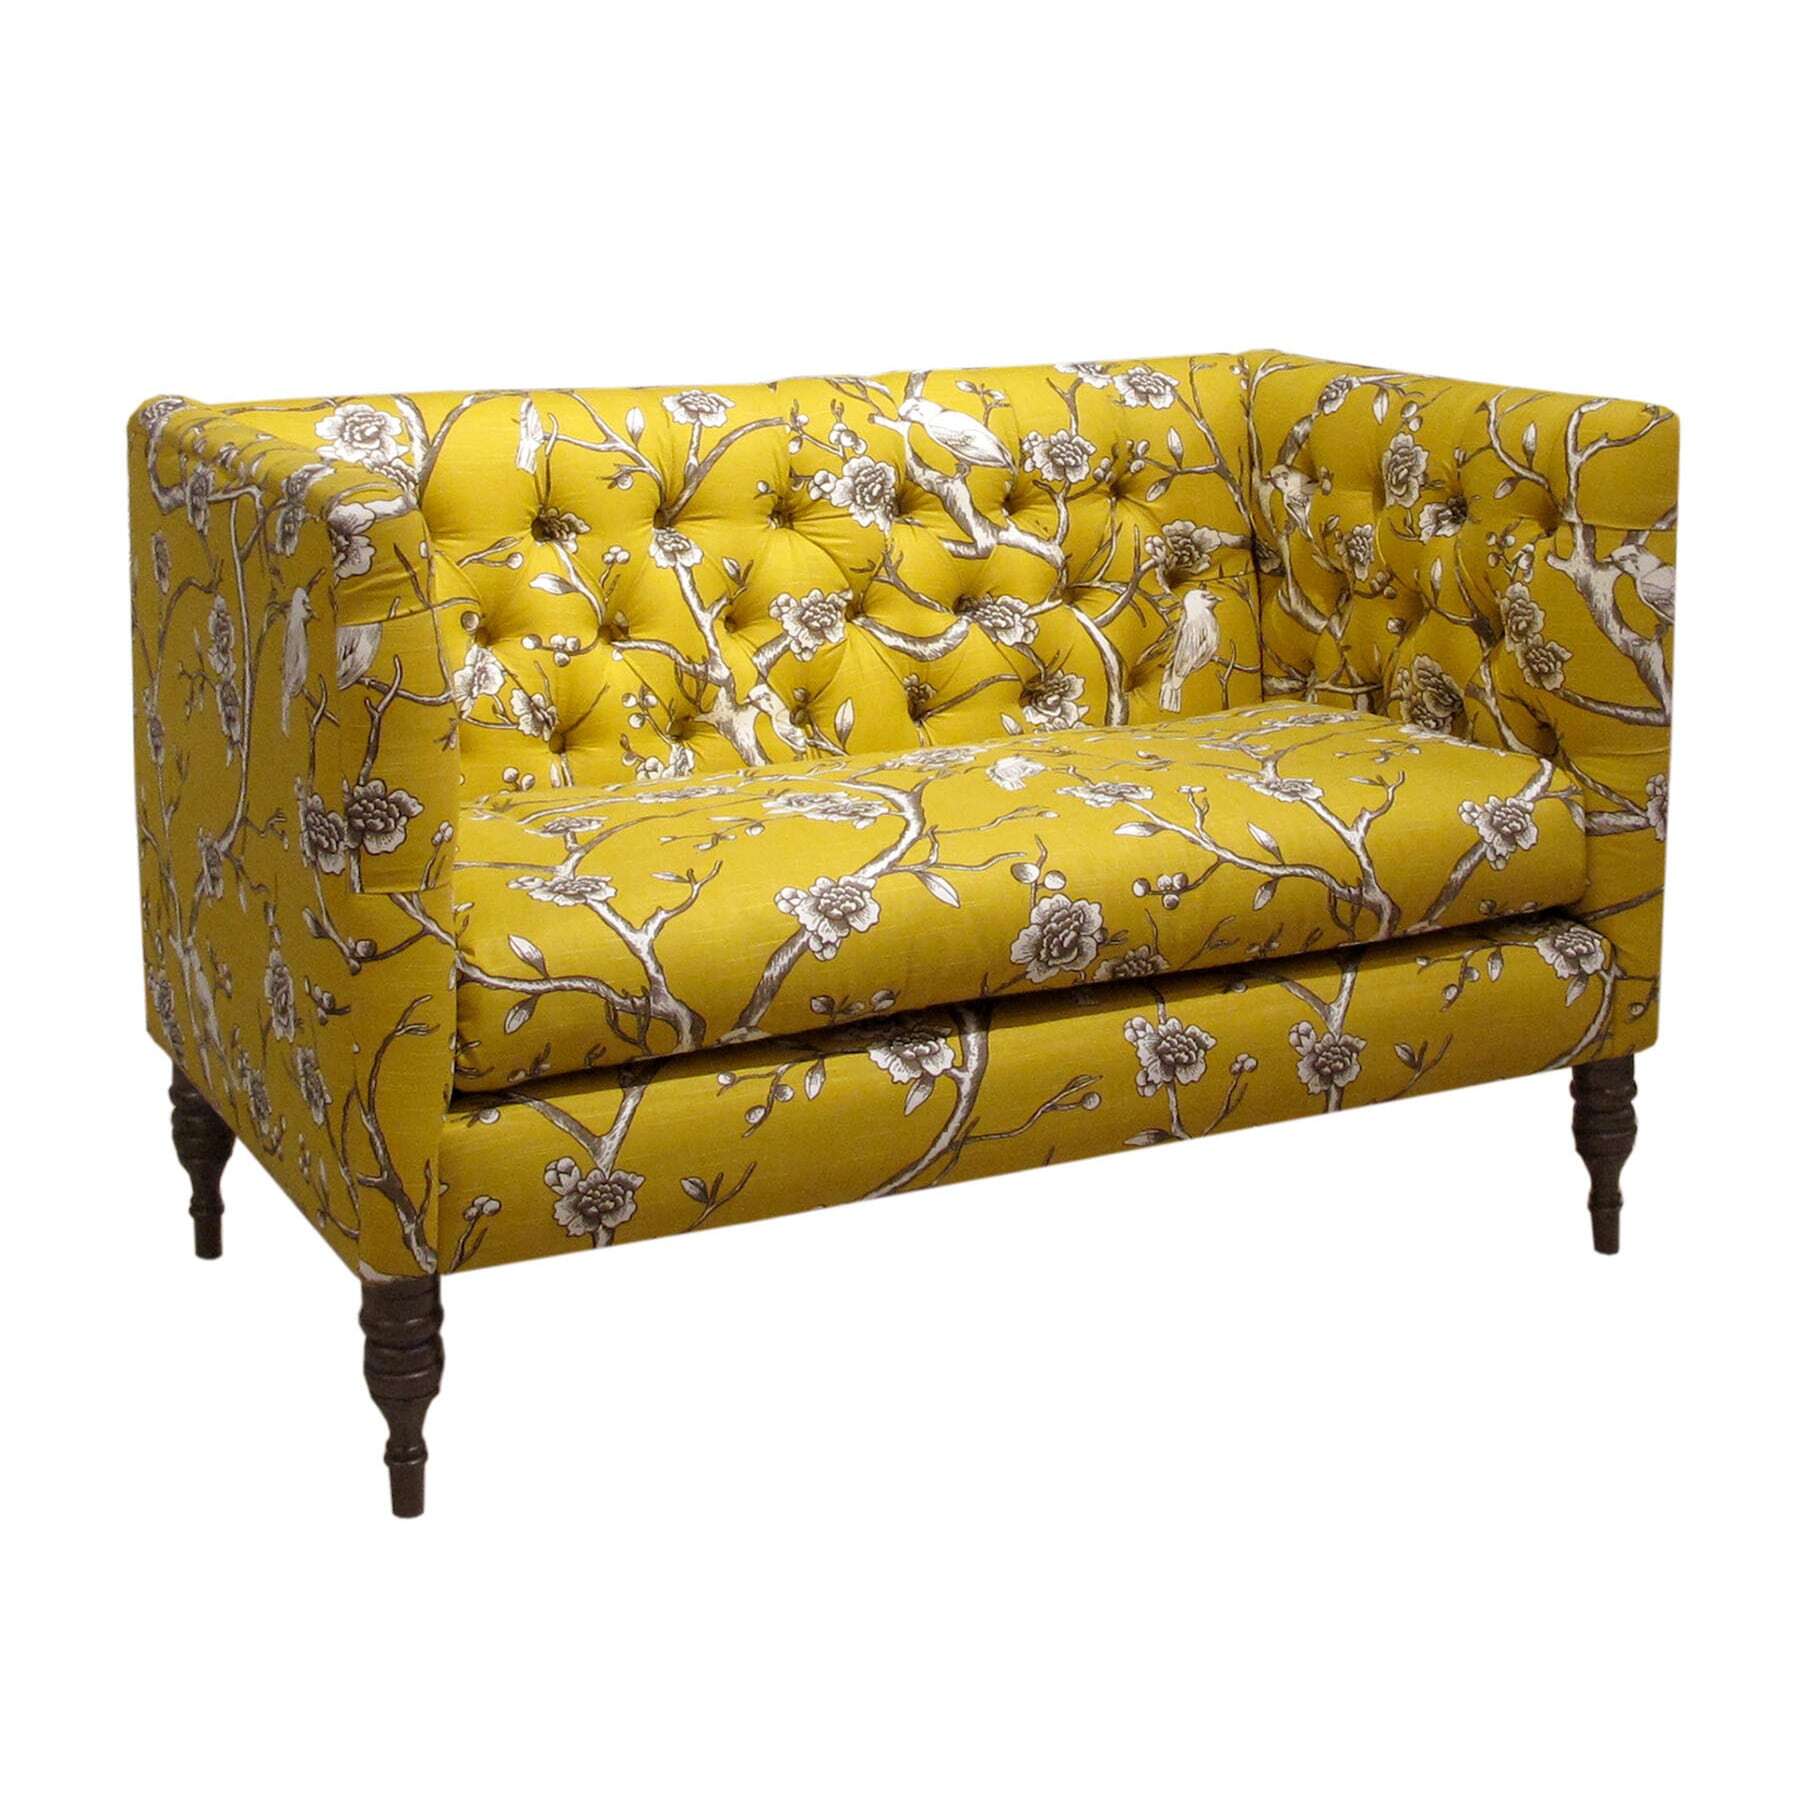 A vintage patterned couch